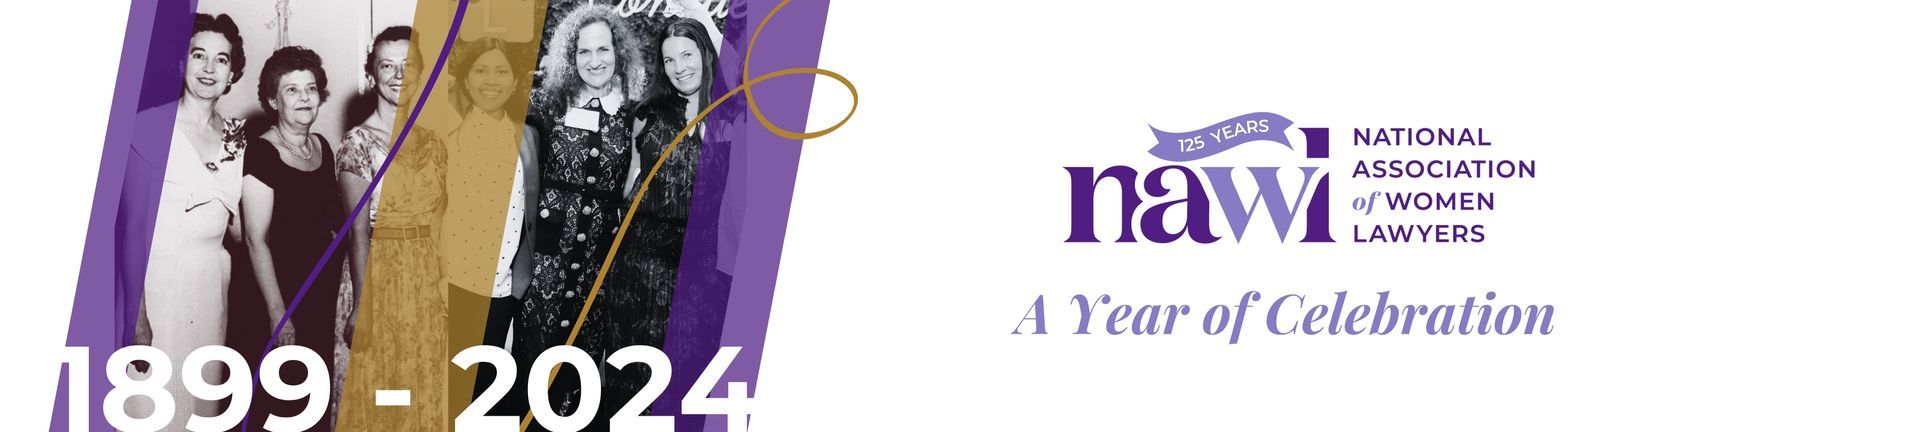 Photos of members throughout NAWL's 125-year history and NAWL's logo.